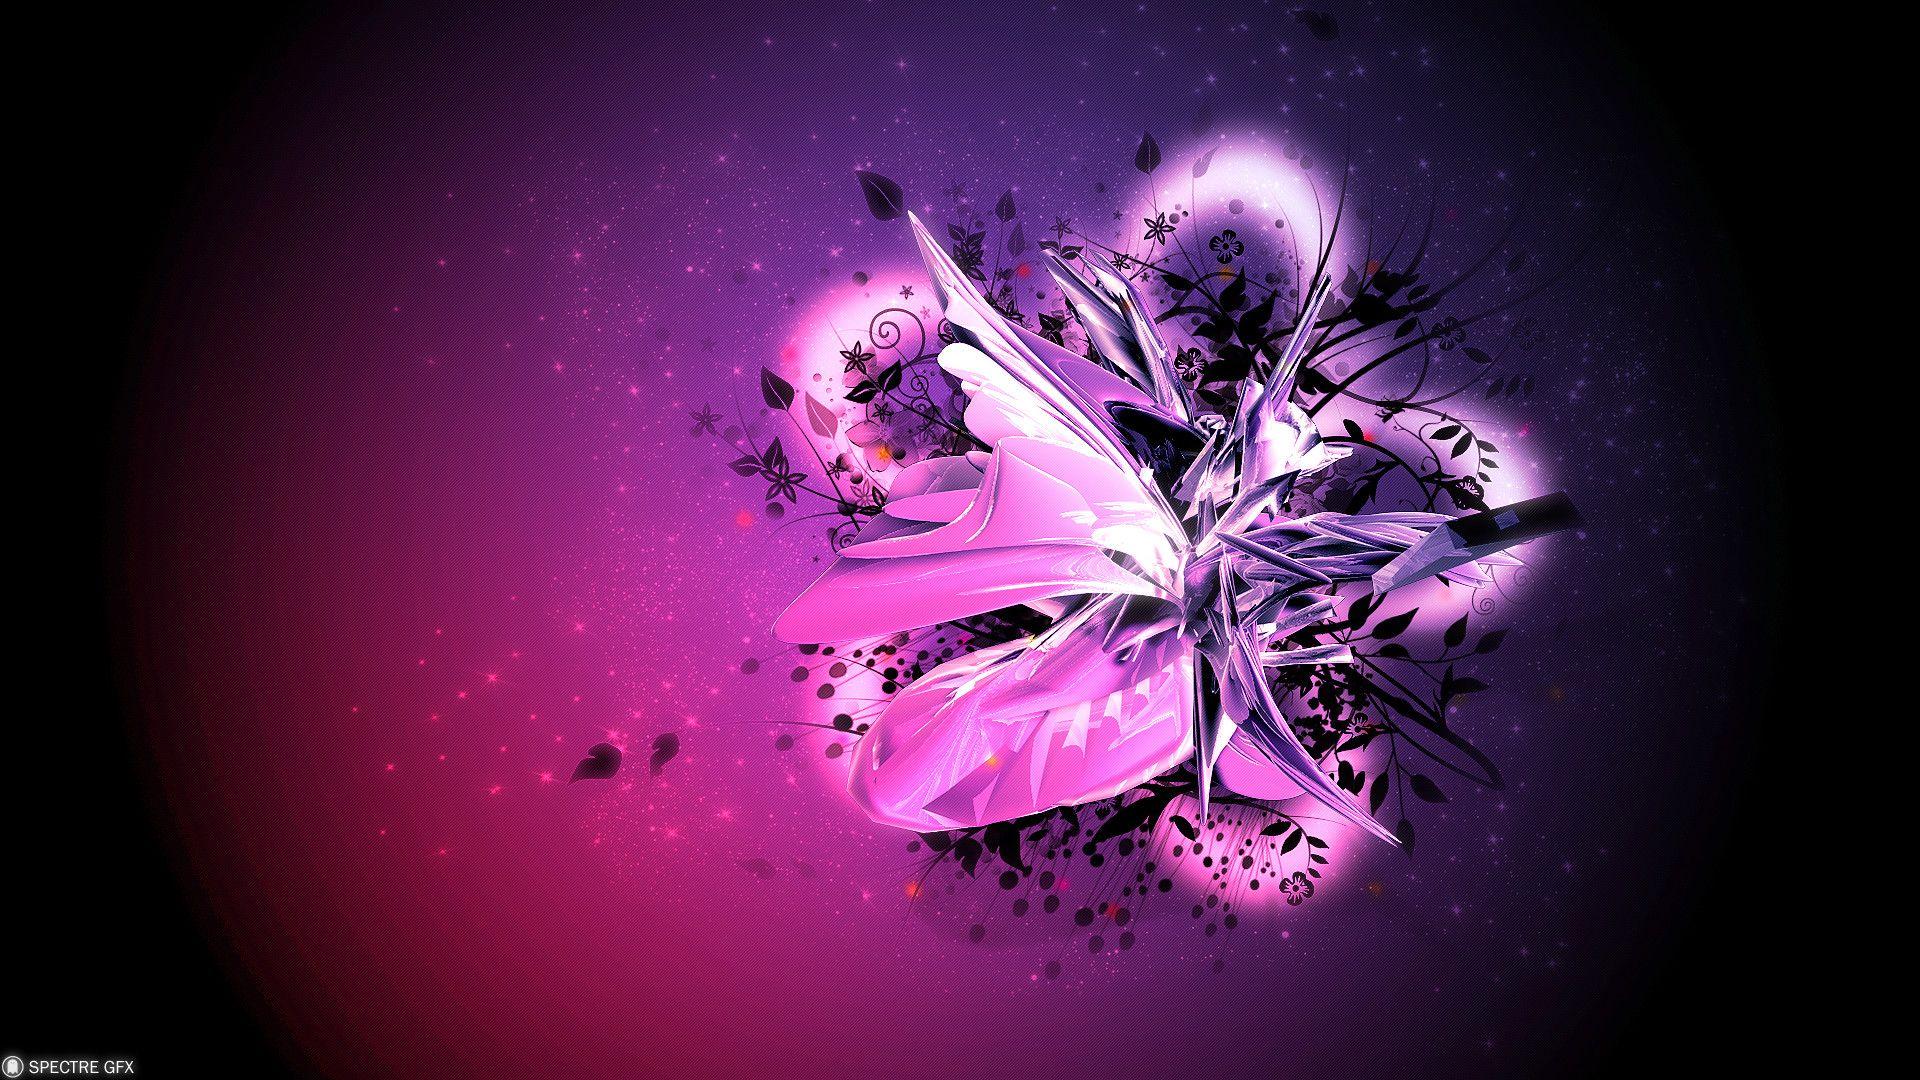 Pink and Black Abstract Wallpapers - Top Free Pink and Black Abstract